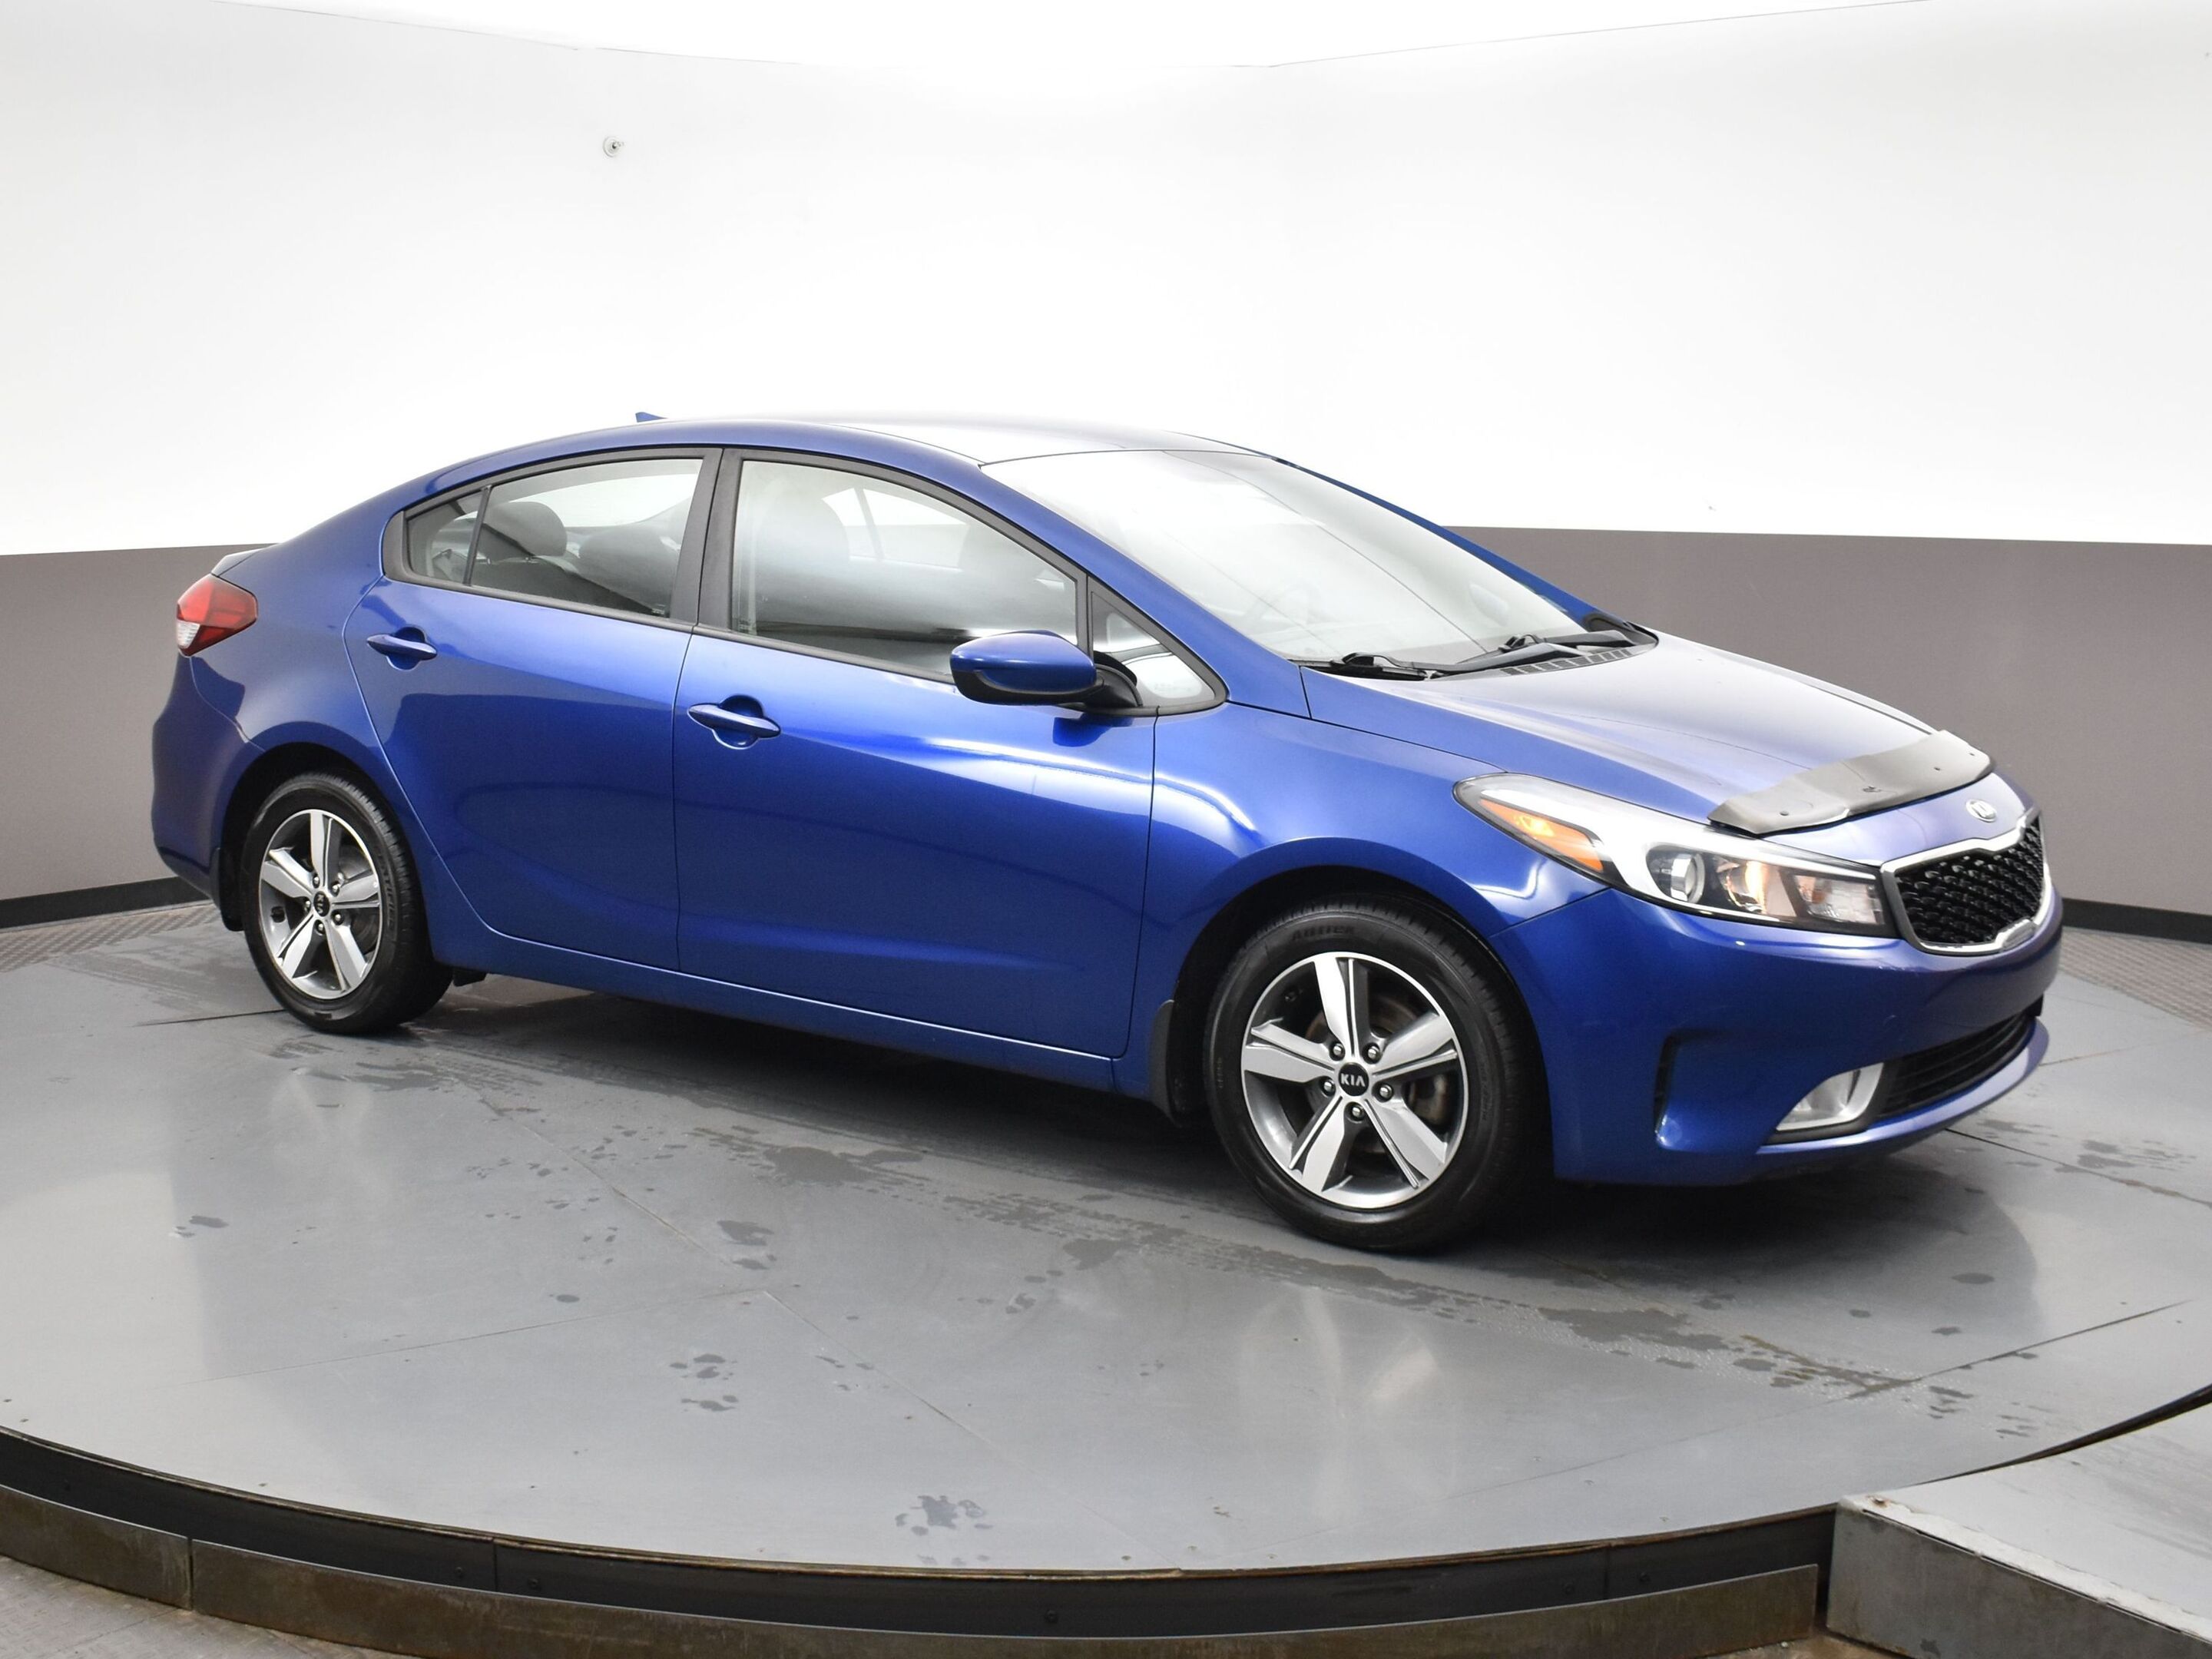 2018 Kia Forte One Owner & Fully Certified LX, Heated Seats, Blue